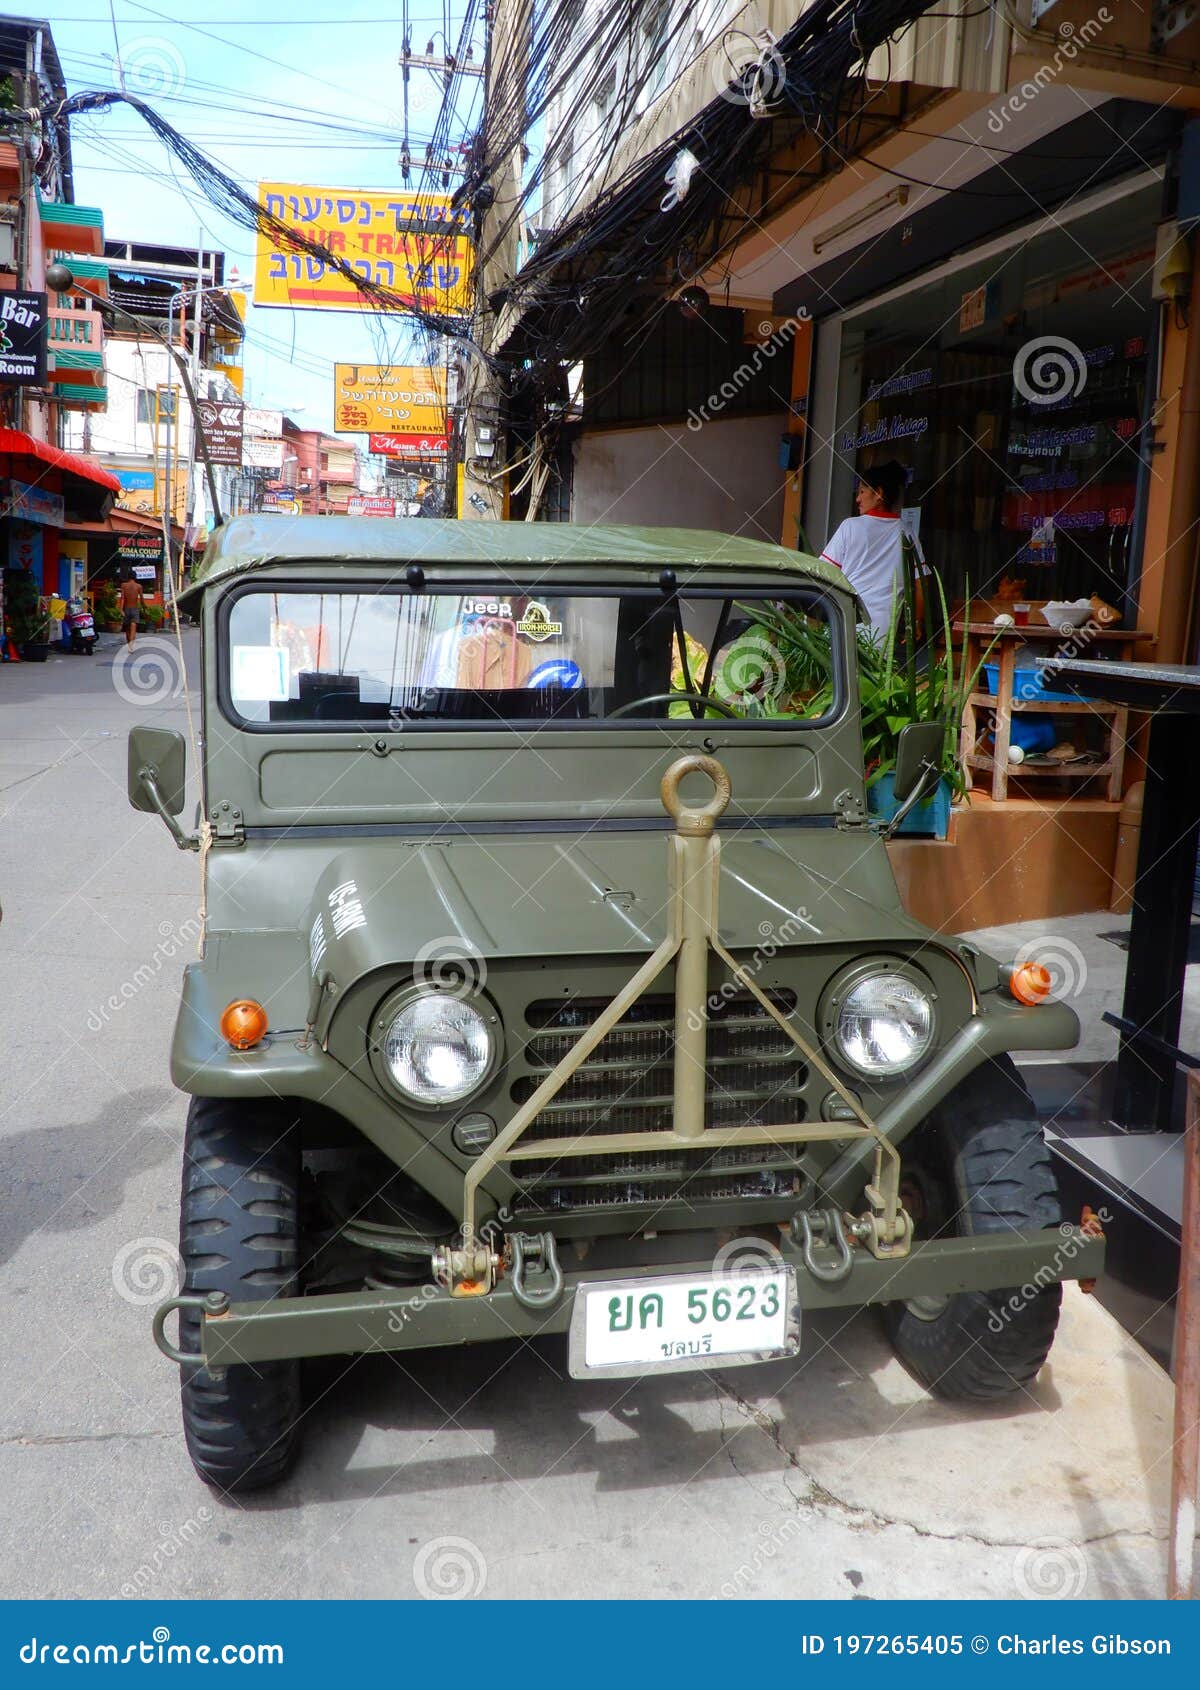 Military Jeep In Olive Drab Paintwork Editorial Image - Image Of Jeep,  Thailand: 197265405